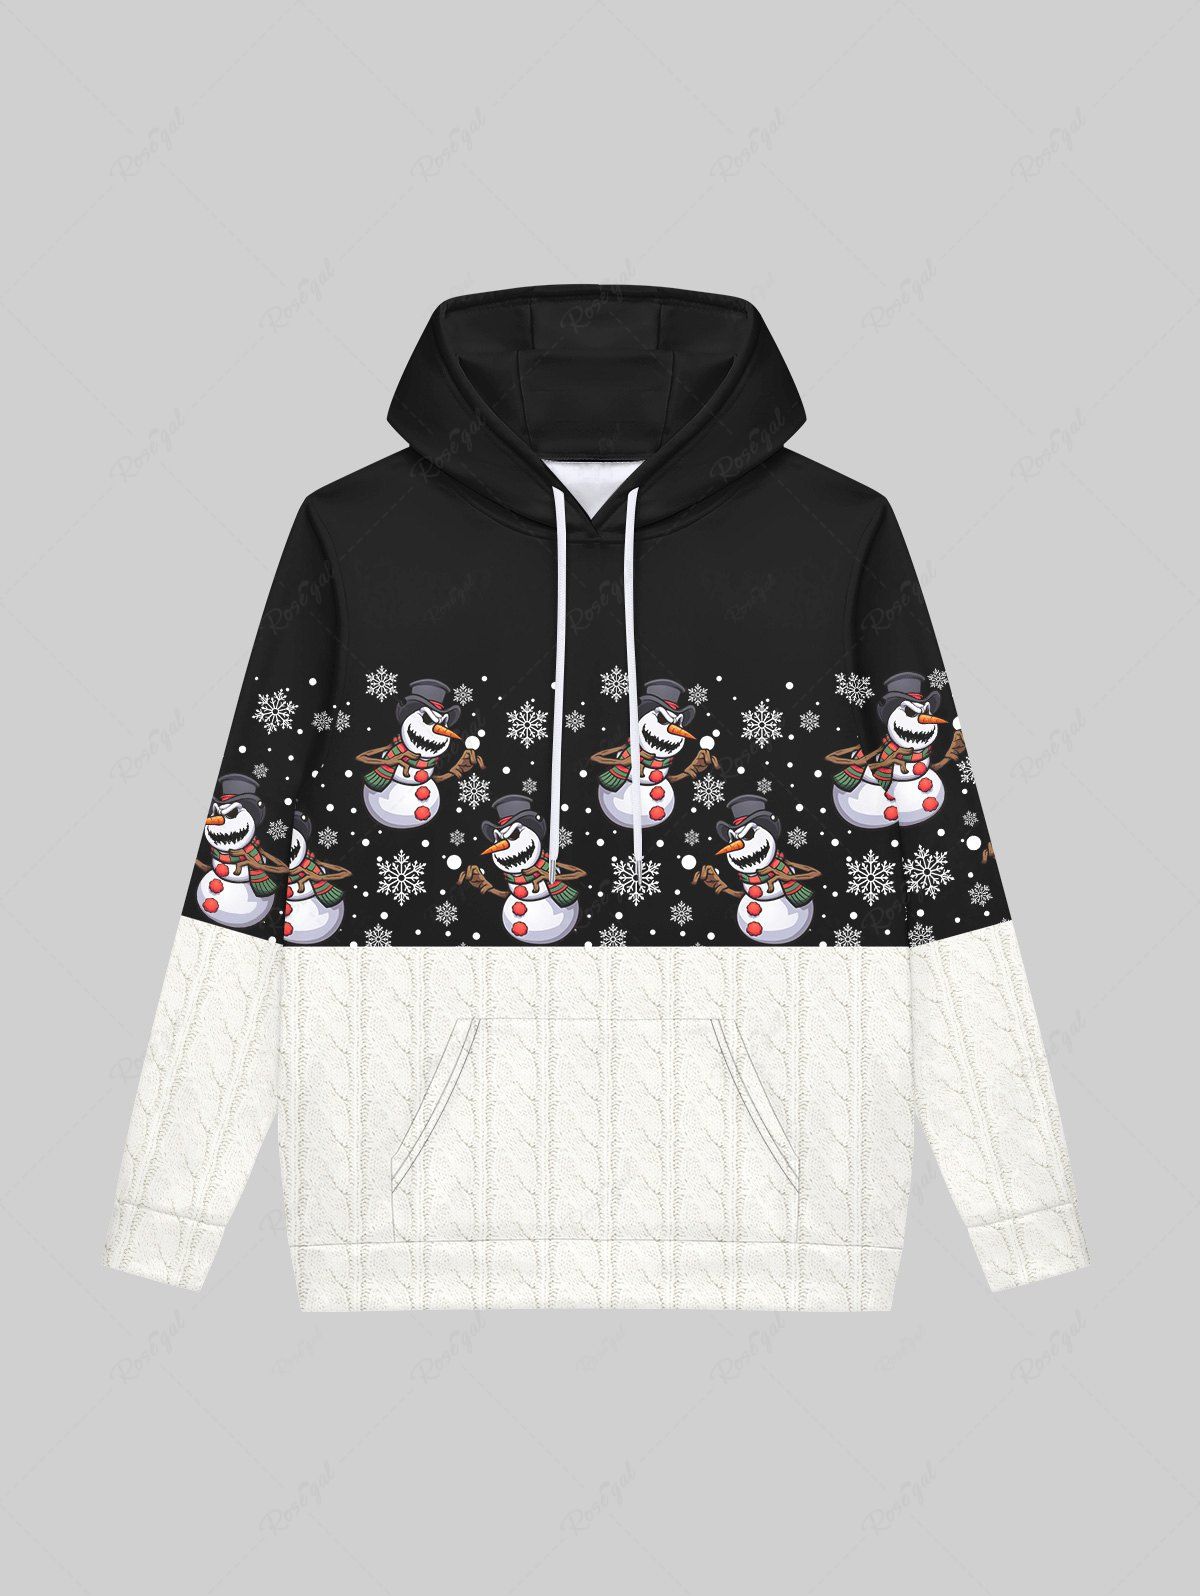 Affordable Gothic Christmas Colorblock Snowman Sowflake Cable Knit 3D Print Pockets Drawstring Hoodie For Men  